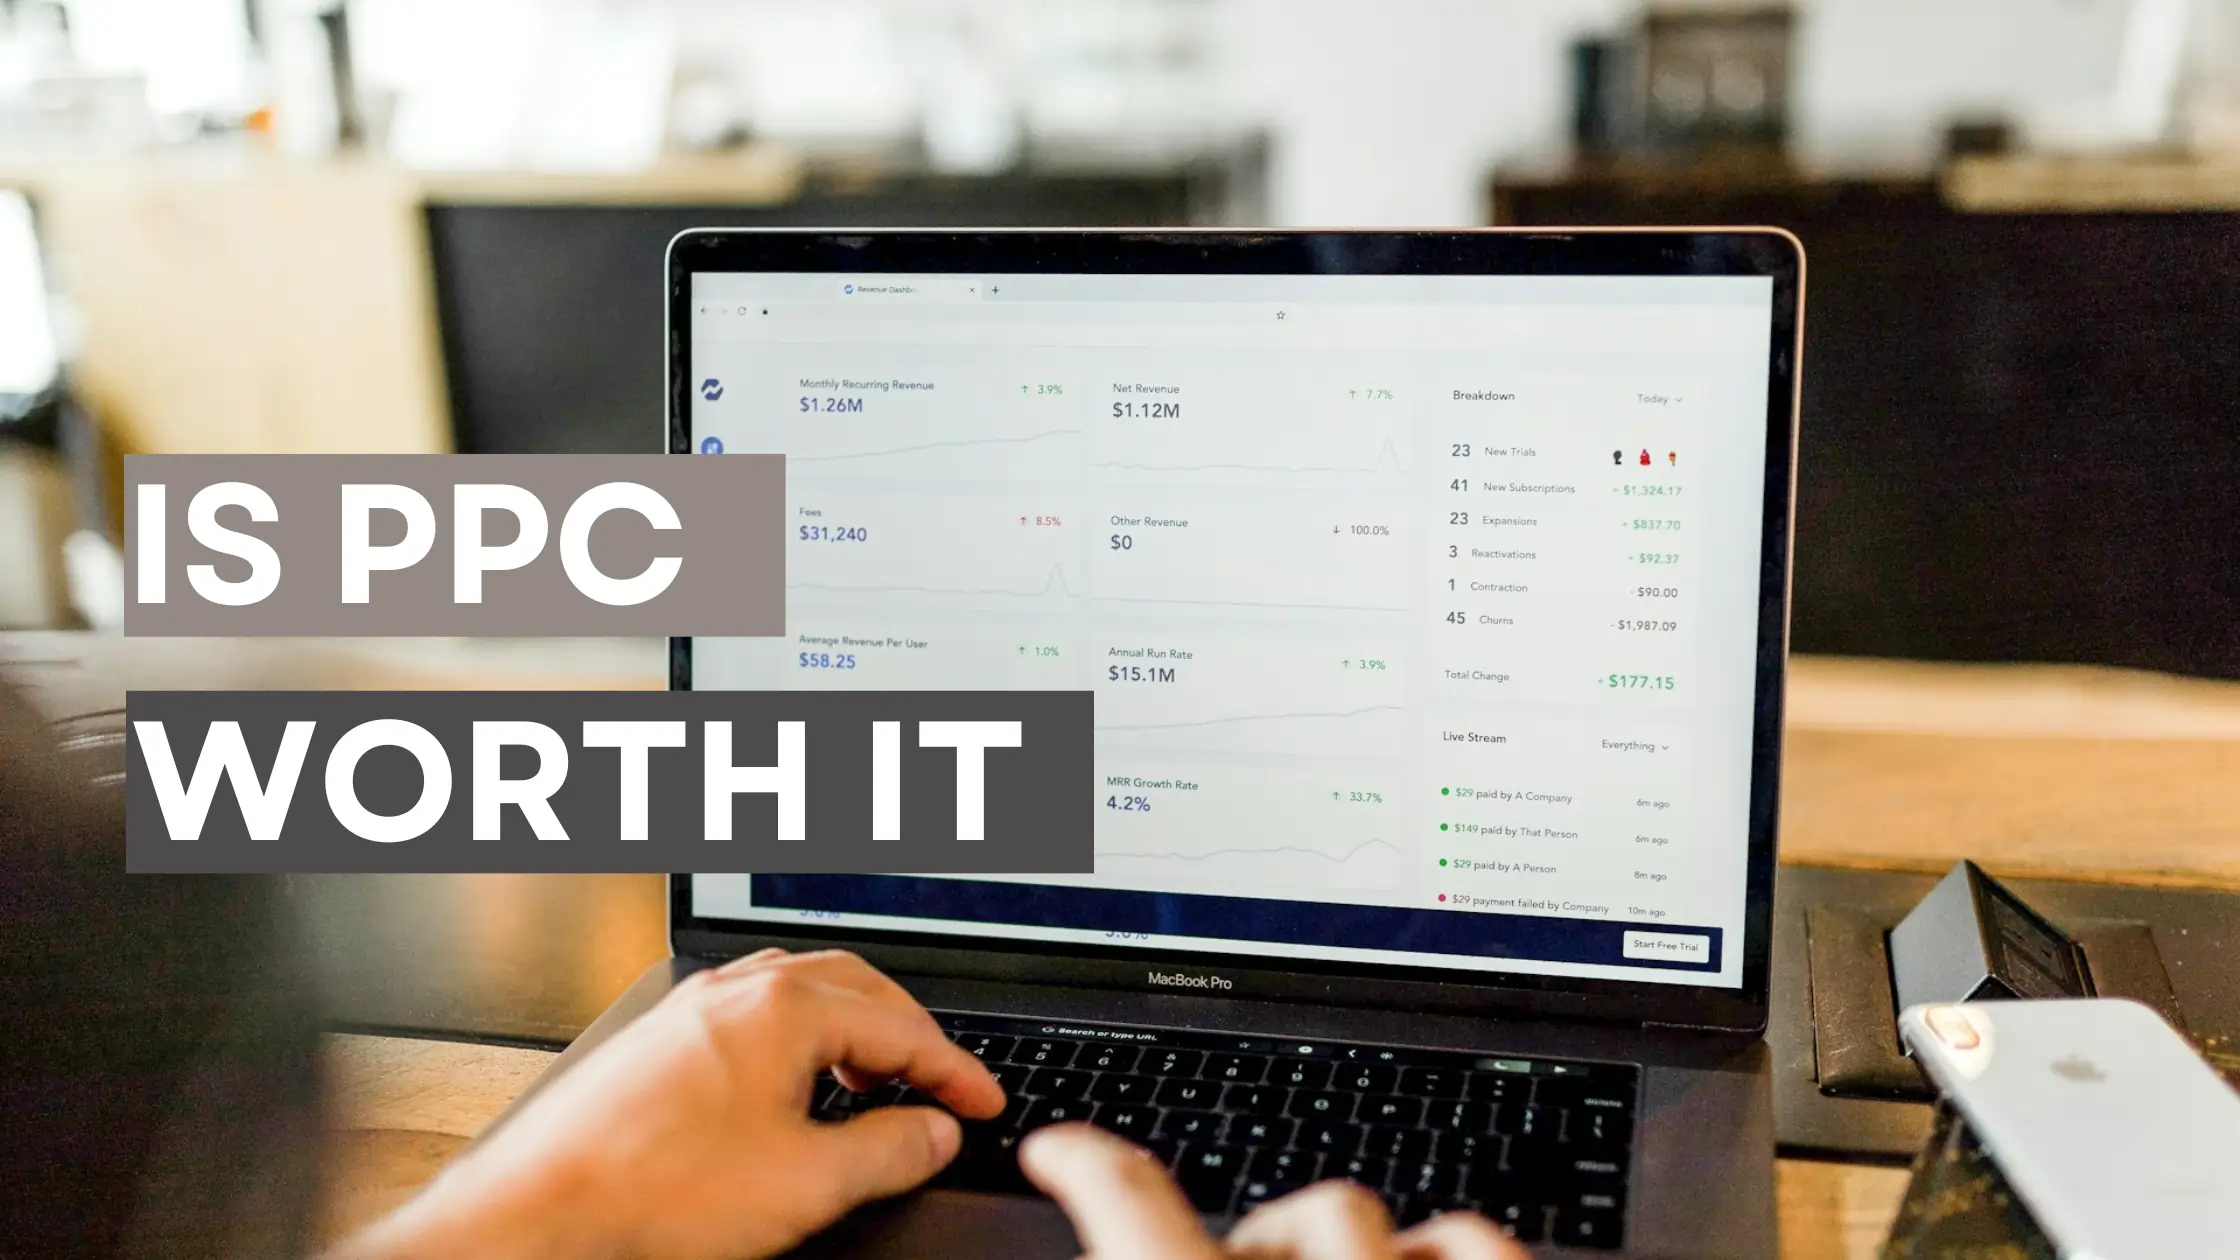 Is PPC Worth It? A look at the value of pay-per-click advertising